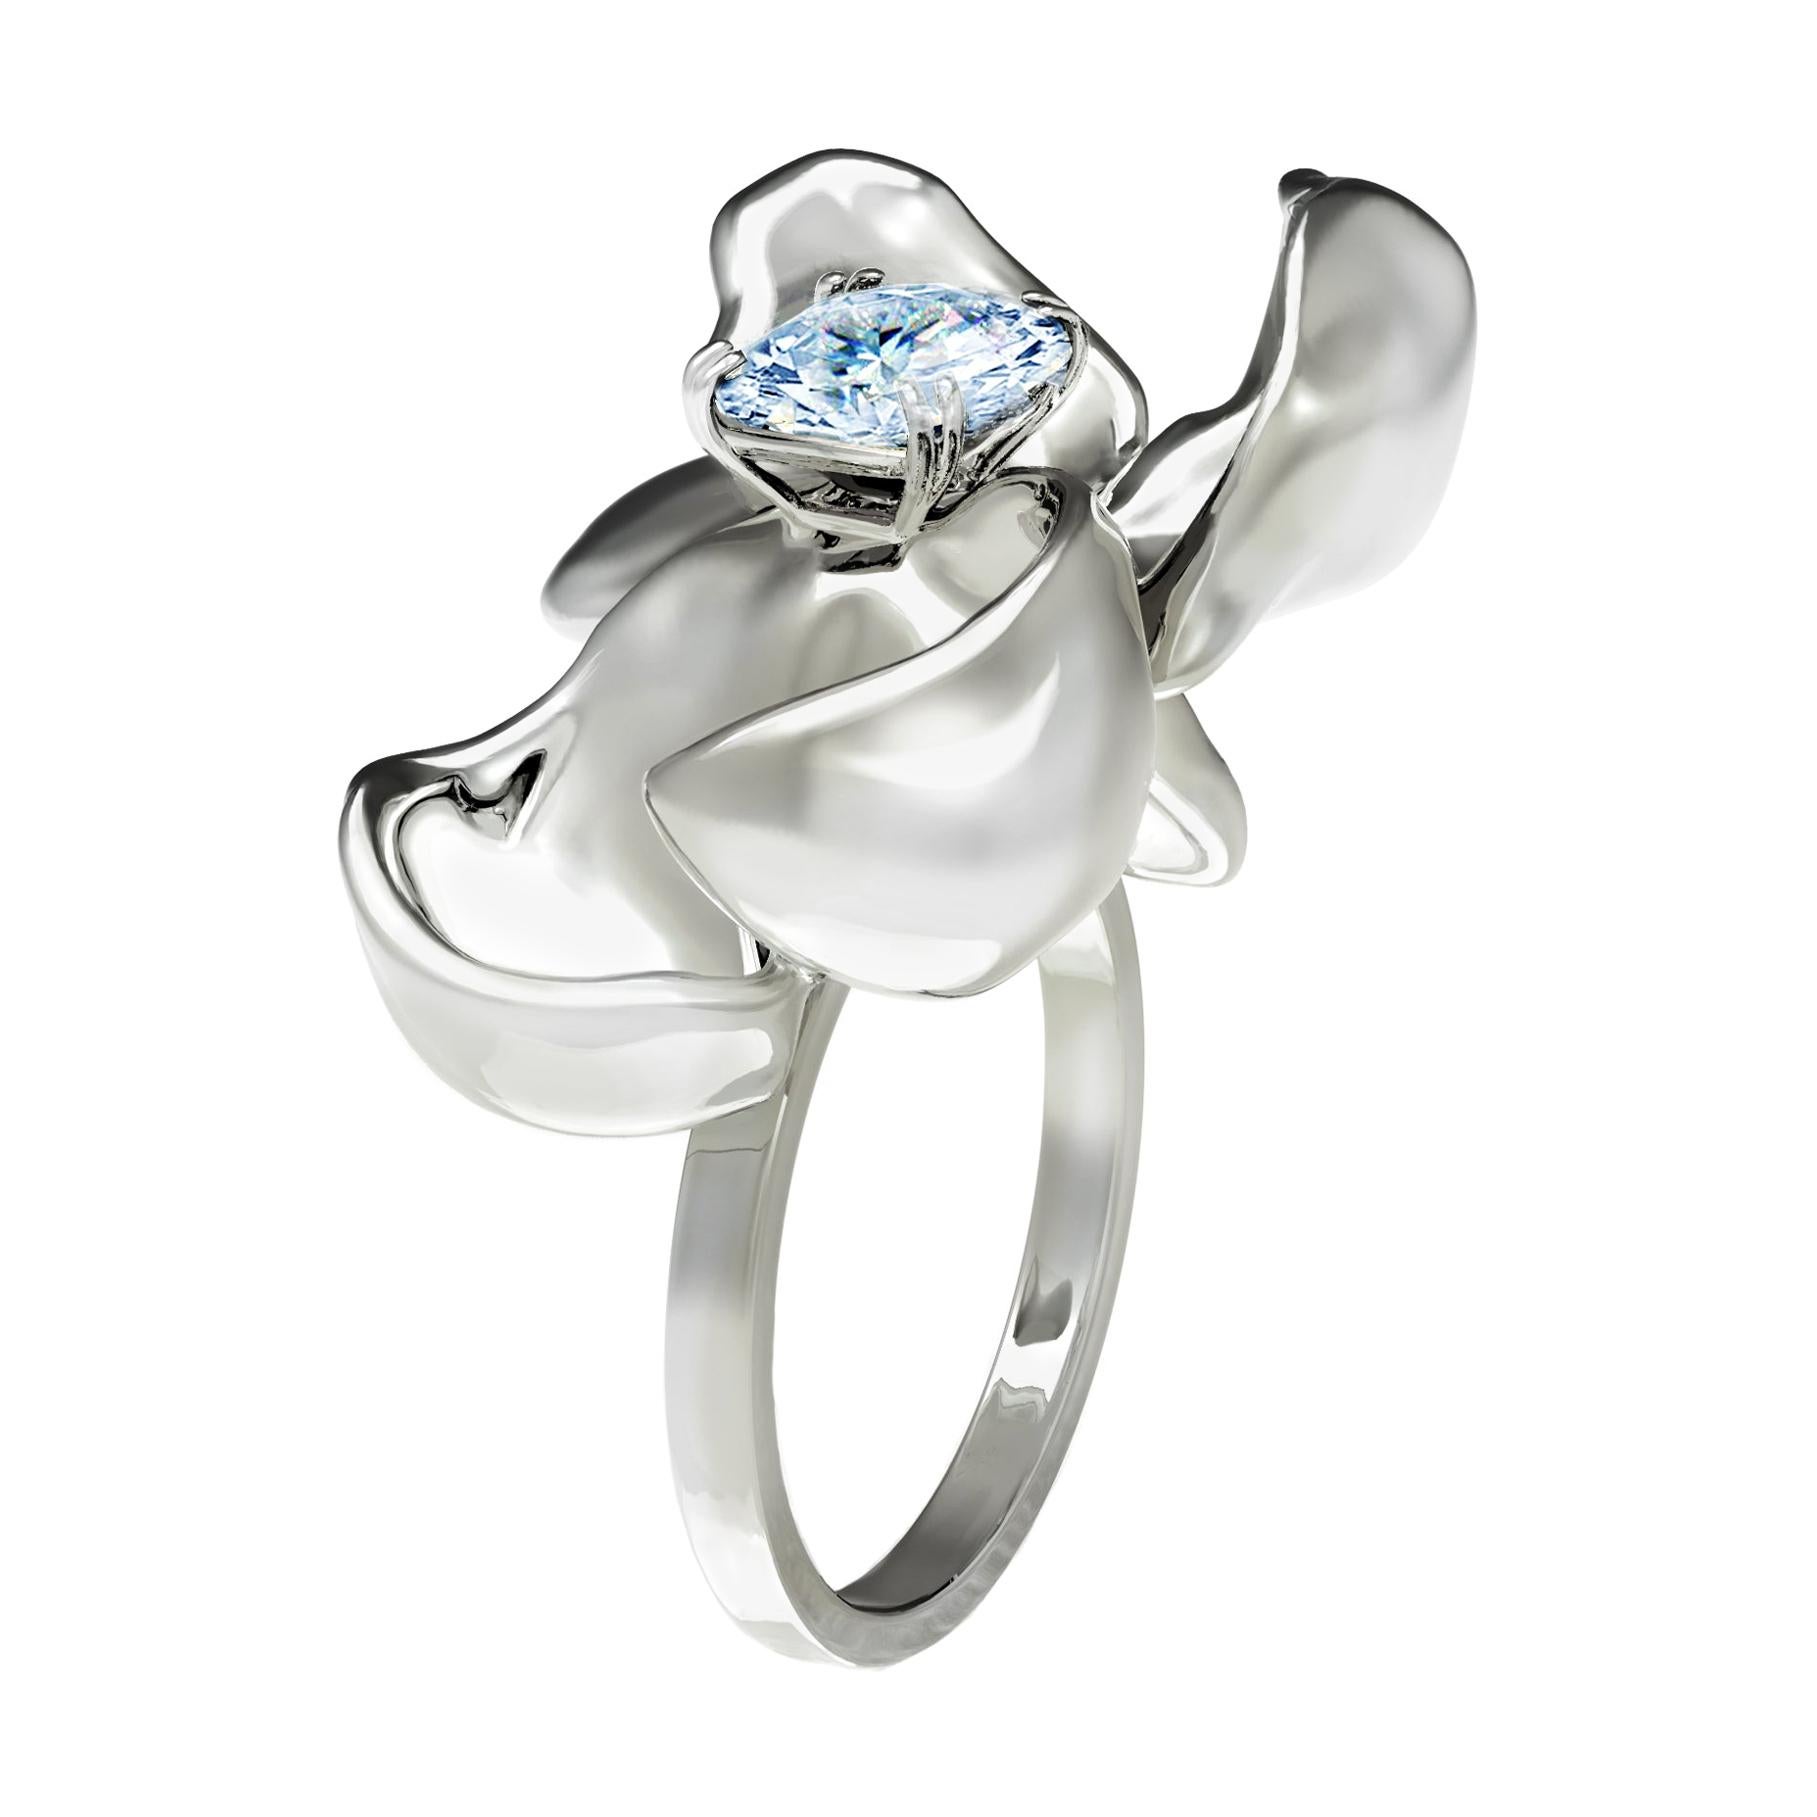 Eighteen Karat White Gold Contemporary Engagement Ring with Light Sapphire